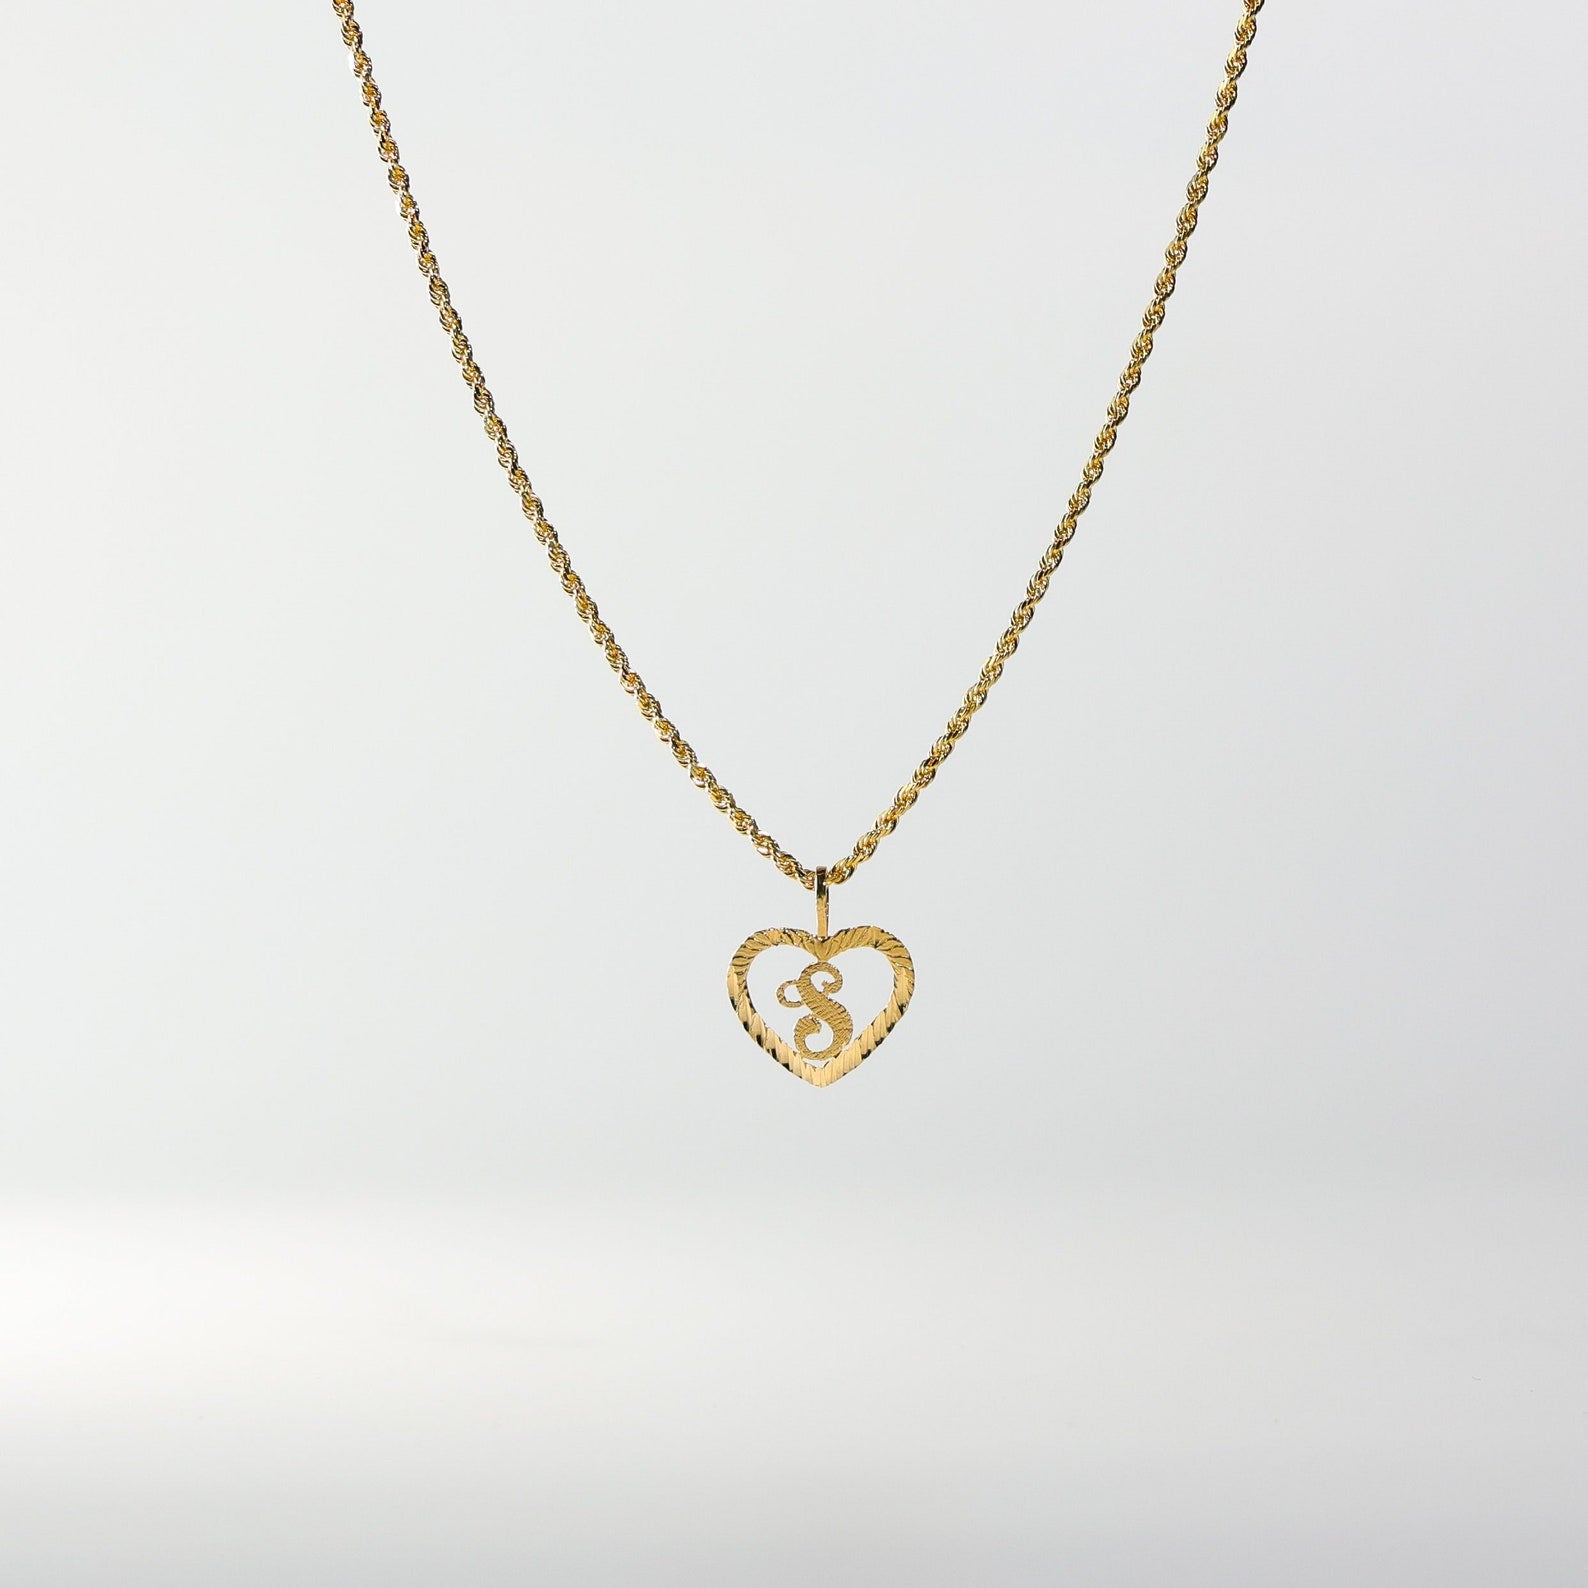 Gold Heart-Shaped Letter S Pendant | A-Z Pendants - Charlie & Co. Jewelry